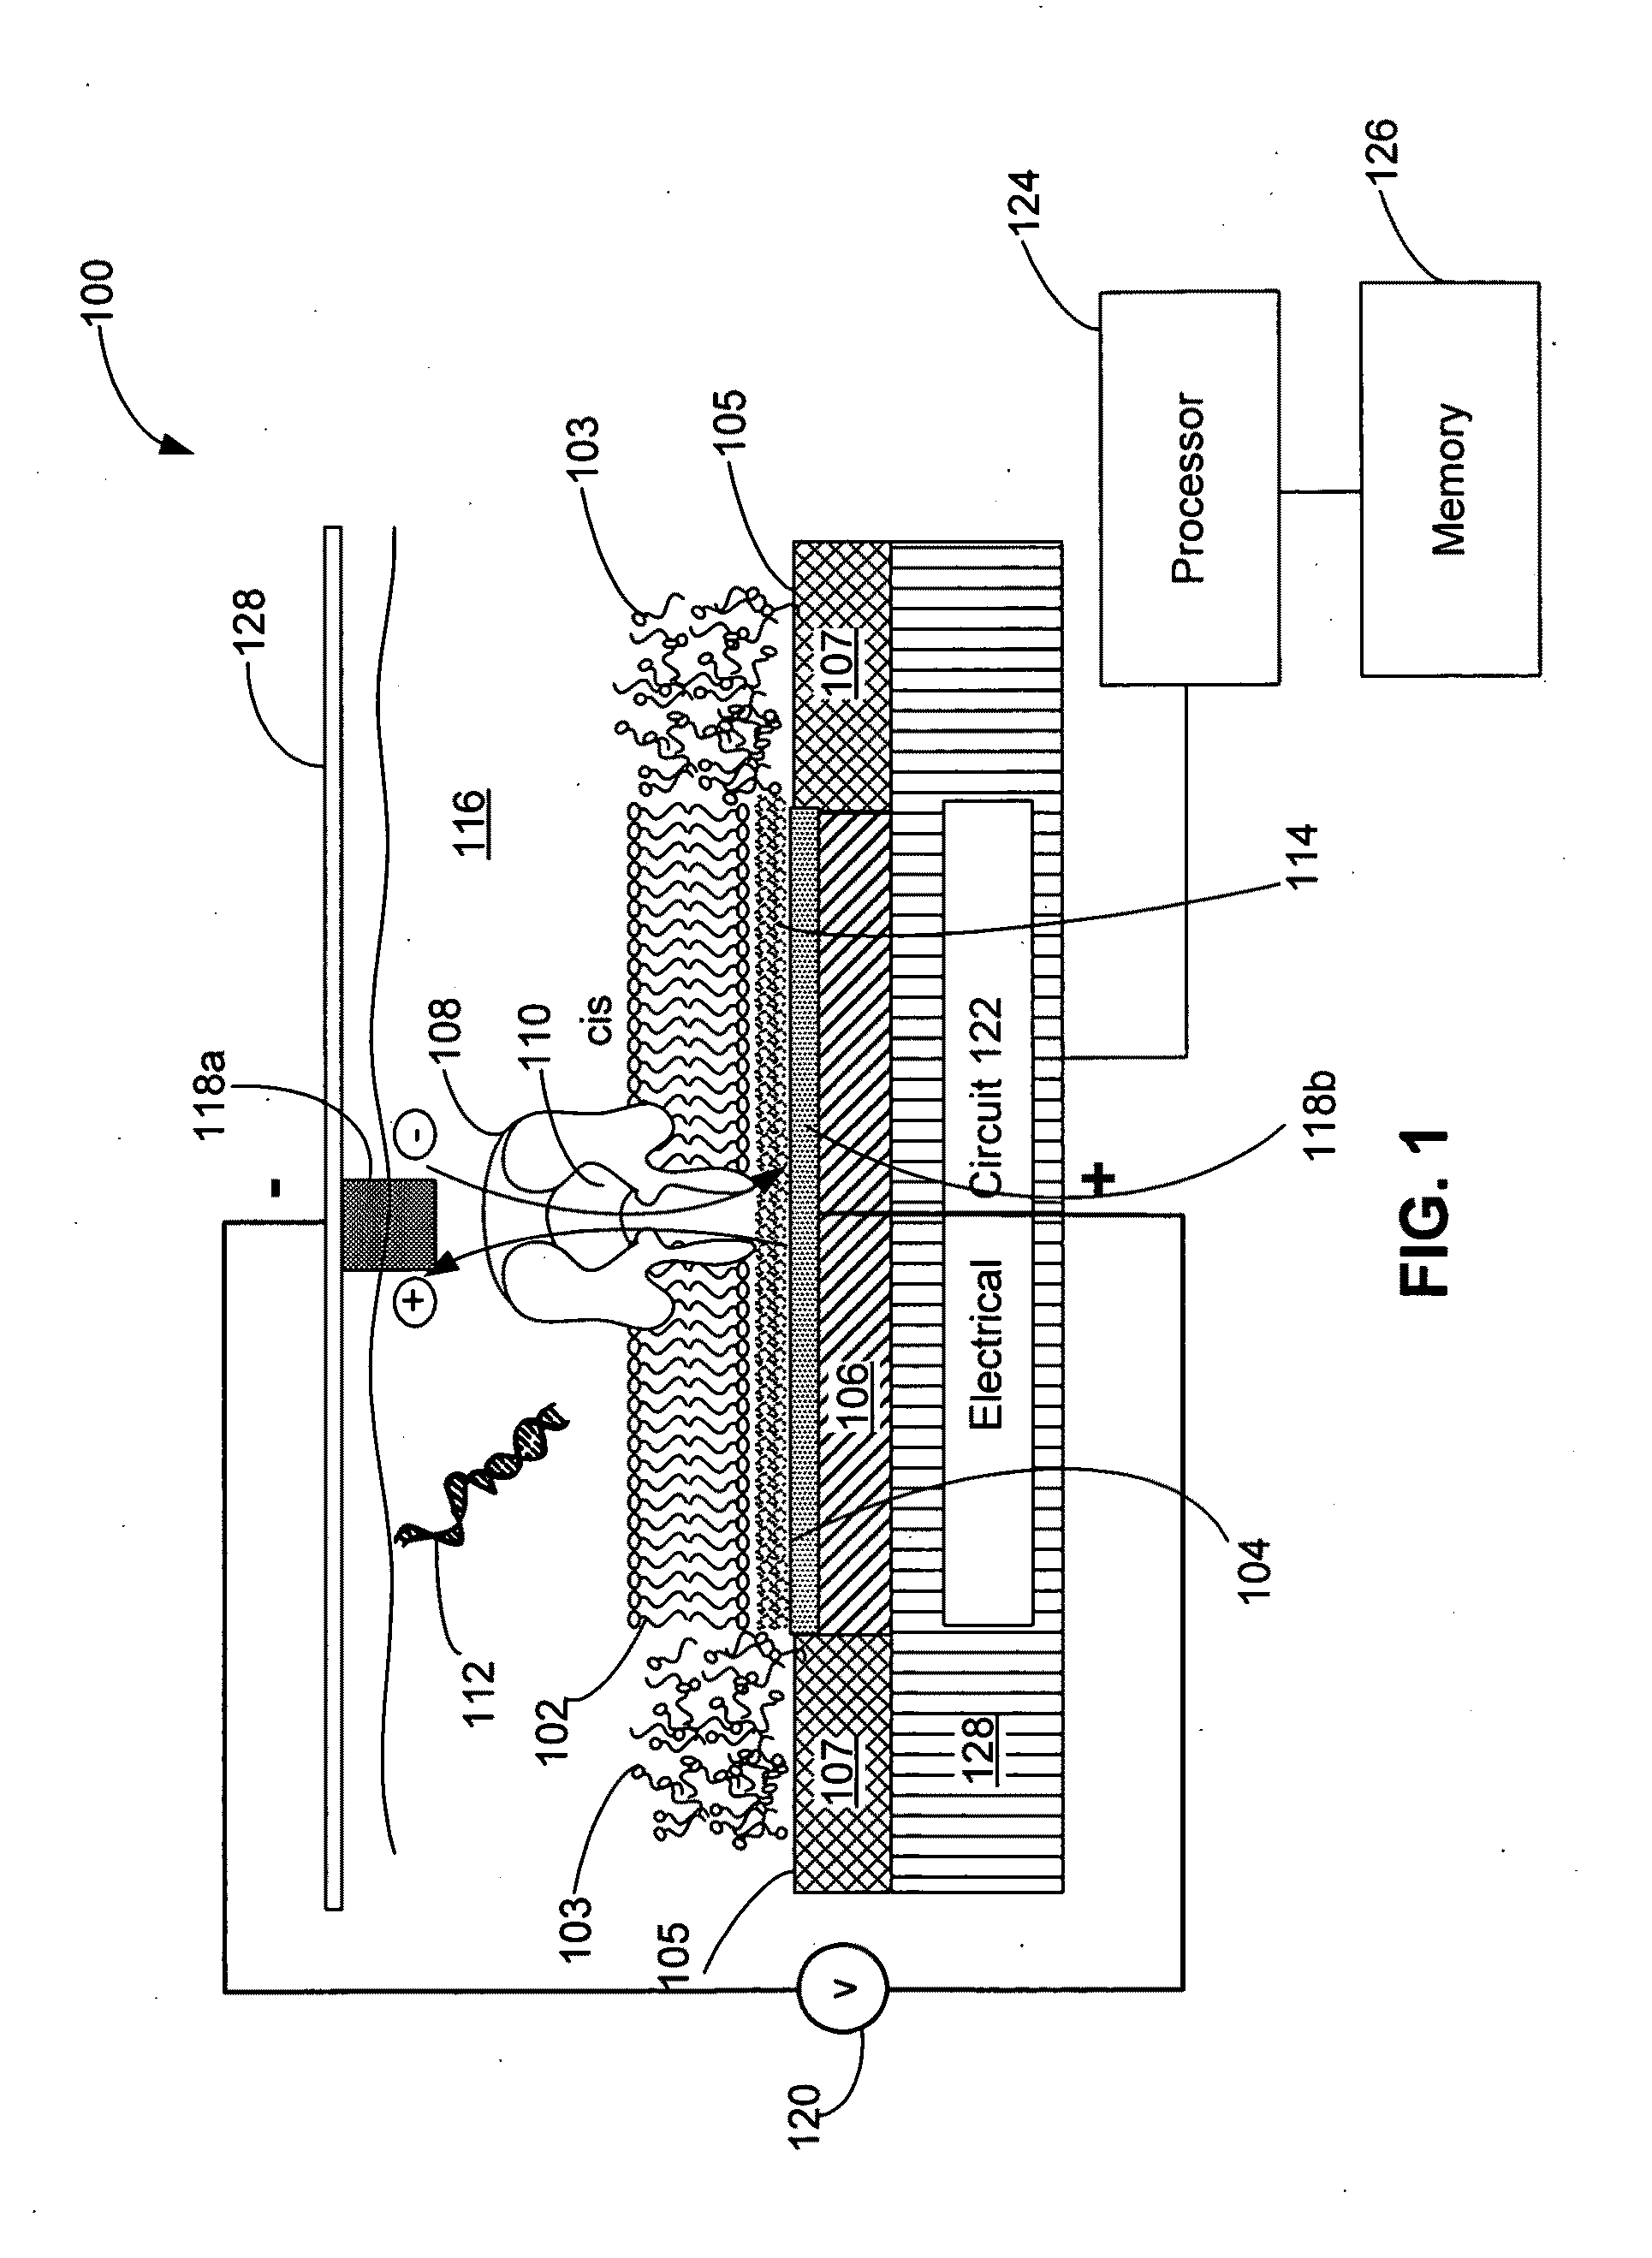 Systems and methods for forming a nanopore in a lipid bilayer